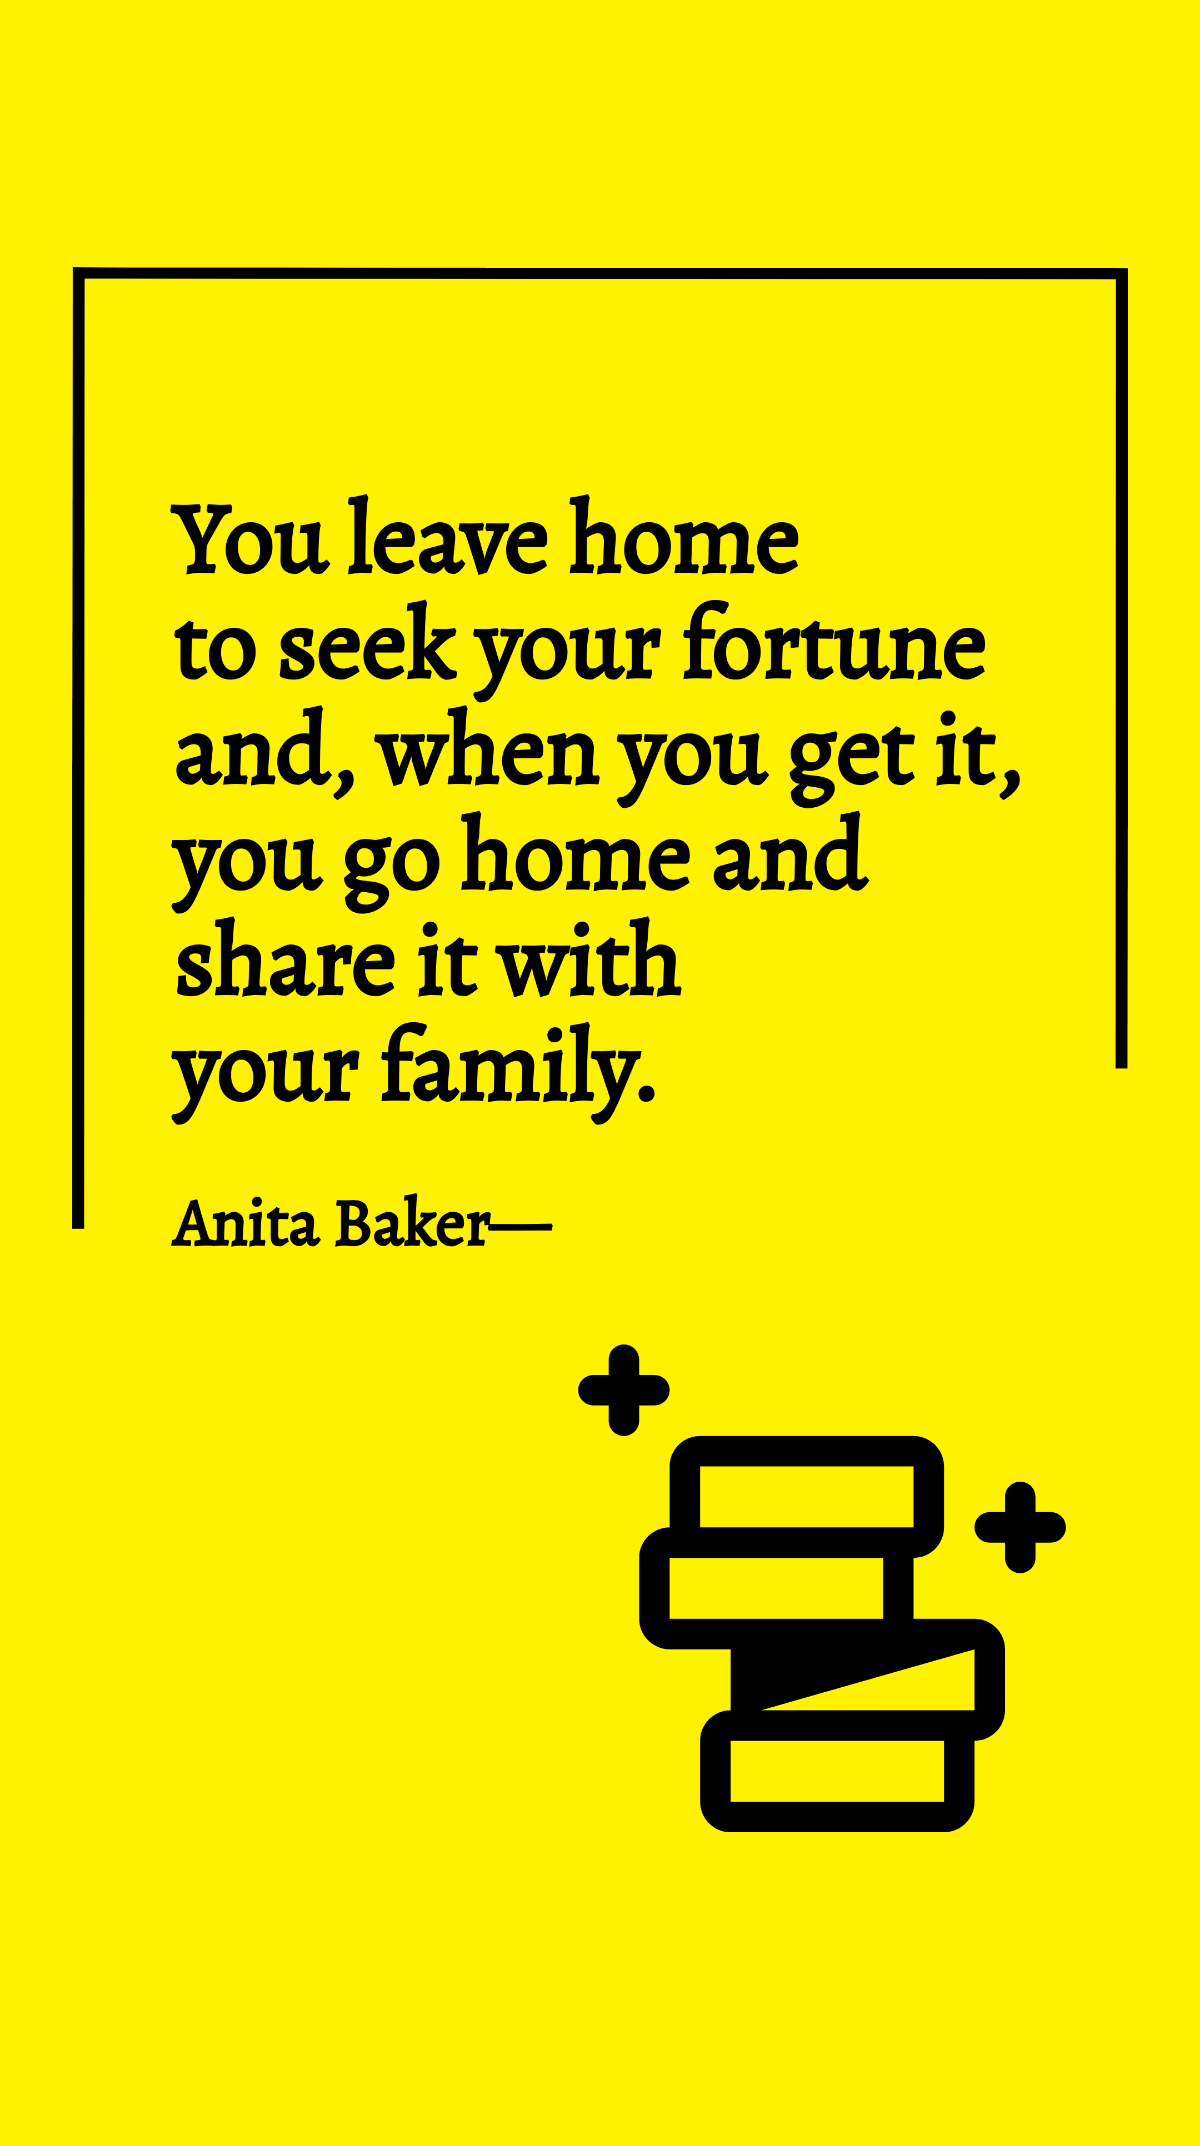 Free Anita Baker - You leave home to seek your fortune and, when you get it, you go home and share it with your family. Template